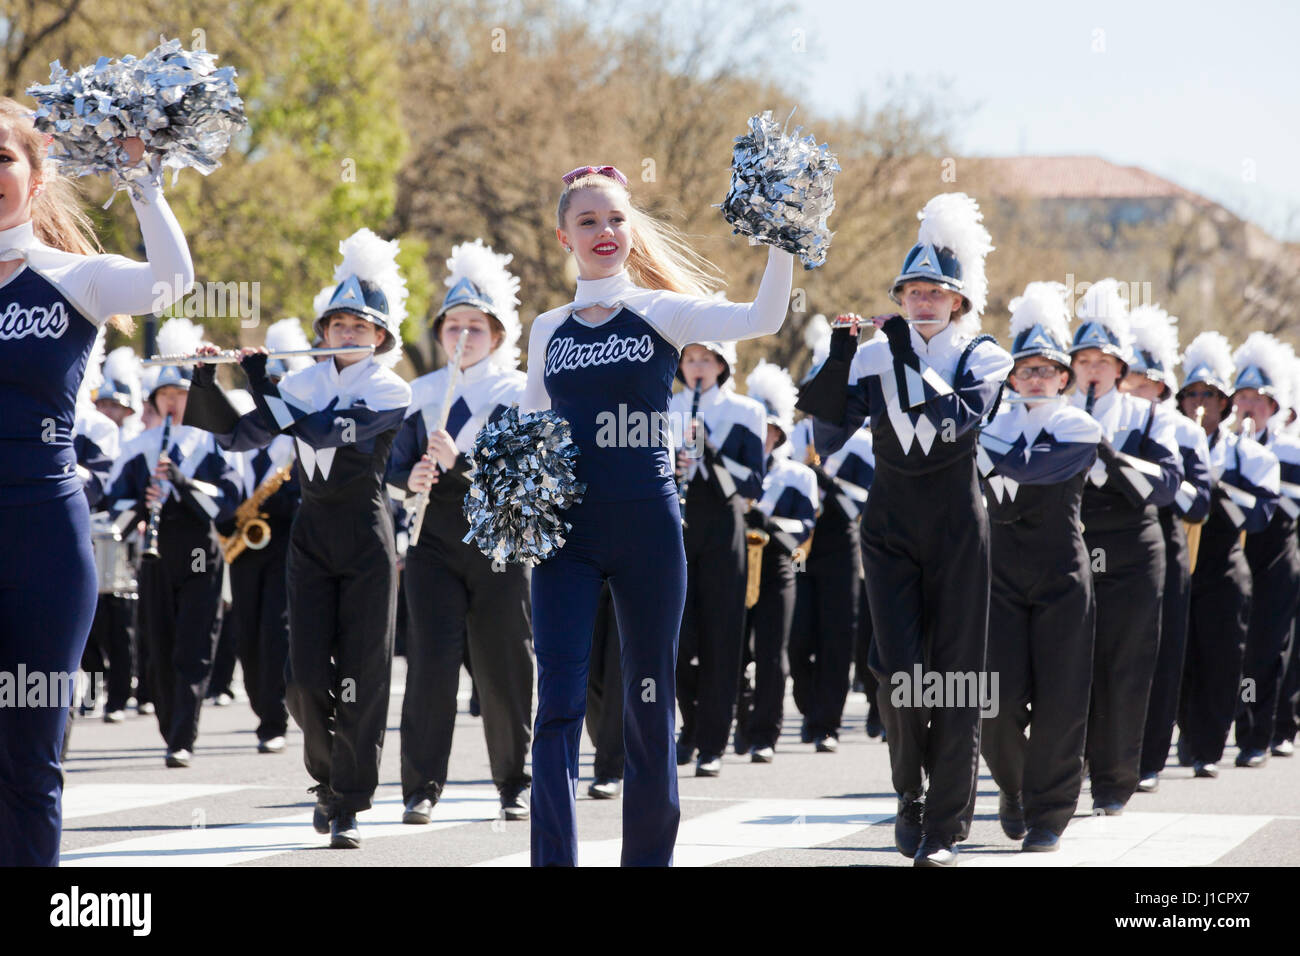 Caucasian female high school cheerleader participating in a street parade - USA Stock Photo